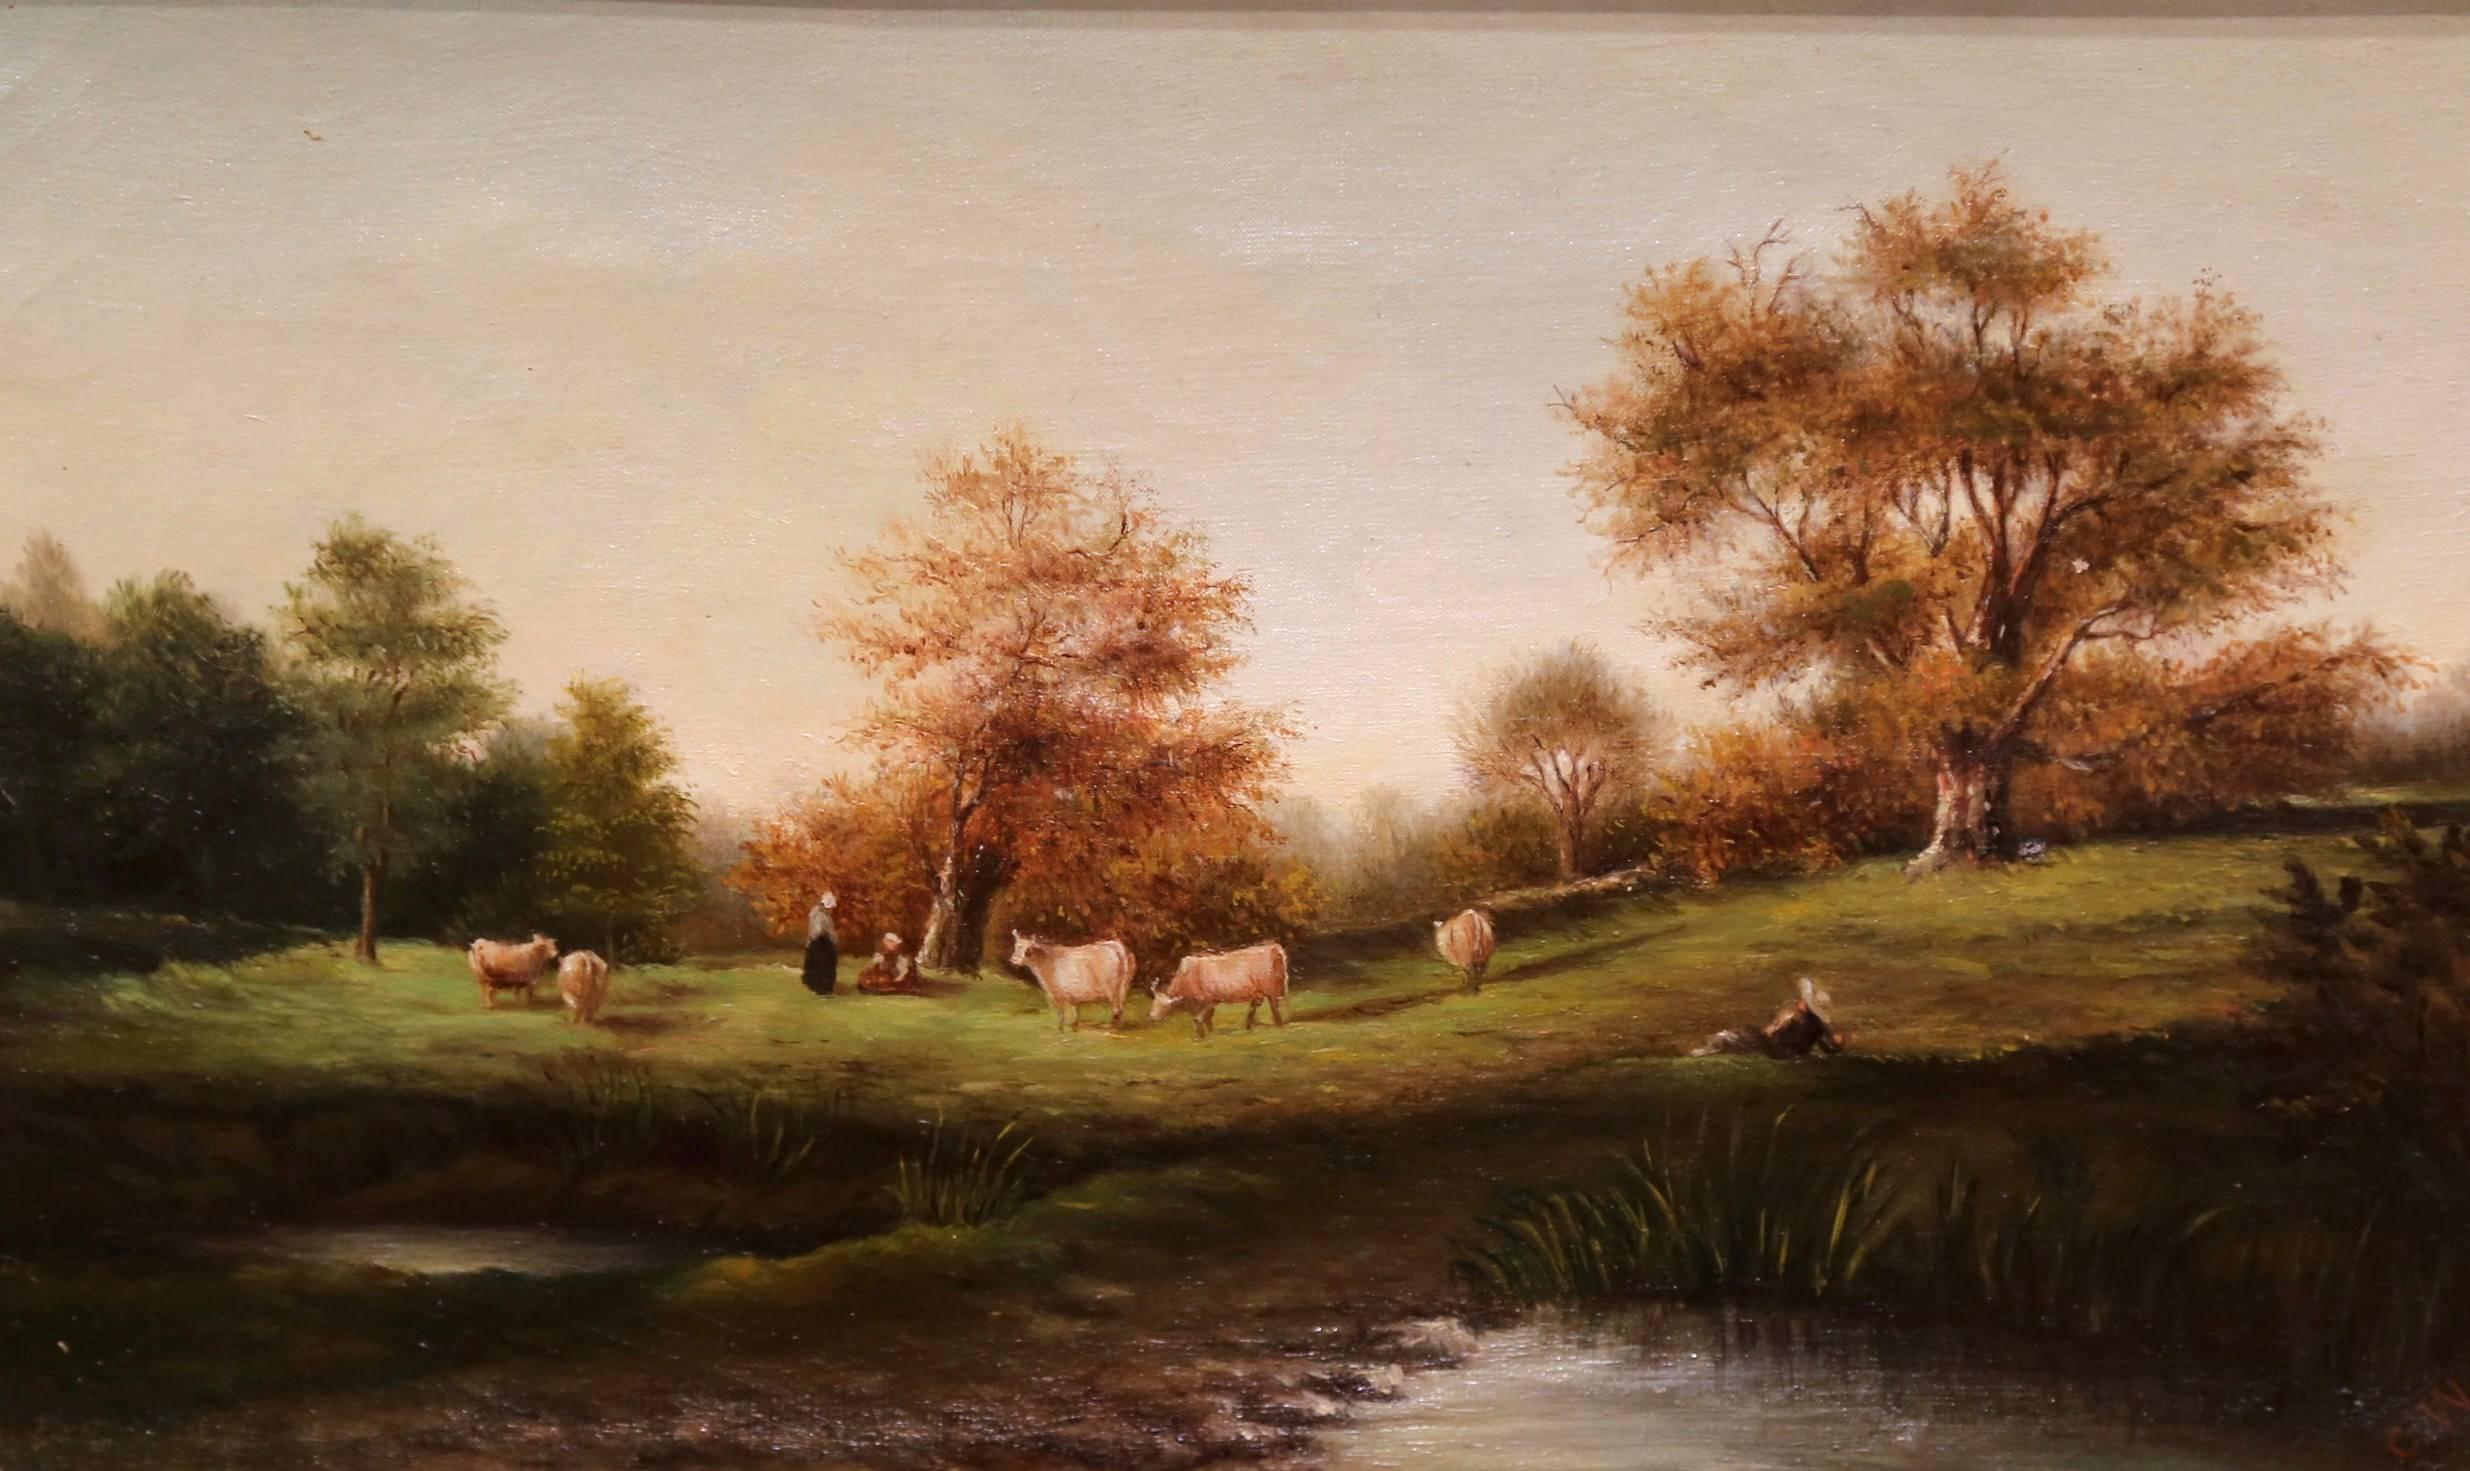 18th Century oil on canvas painting in original gilt frame; crafted circa 1780, the painting features a landscape with cows and farmers with a pond in the foreground. Beautiful carved frame with gold leaf finish. The art is signed Wolf with hand